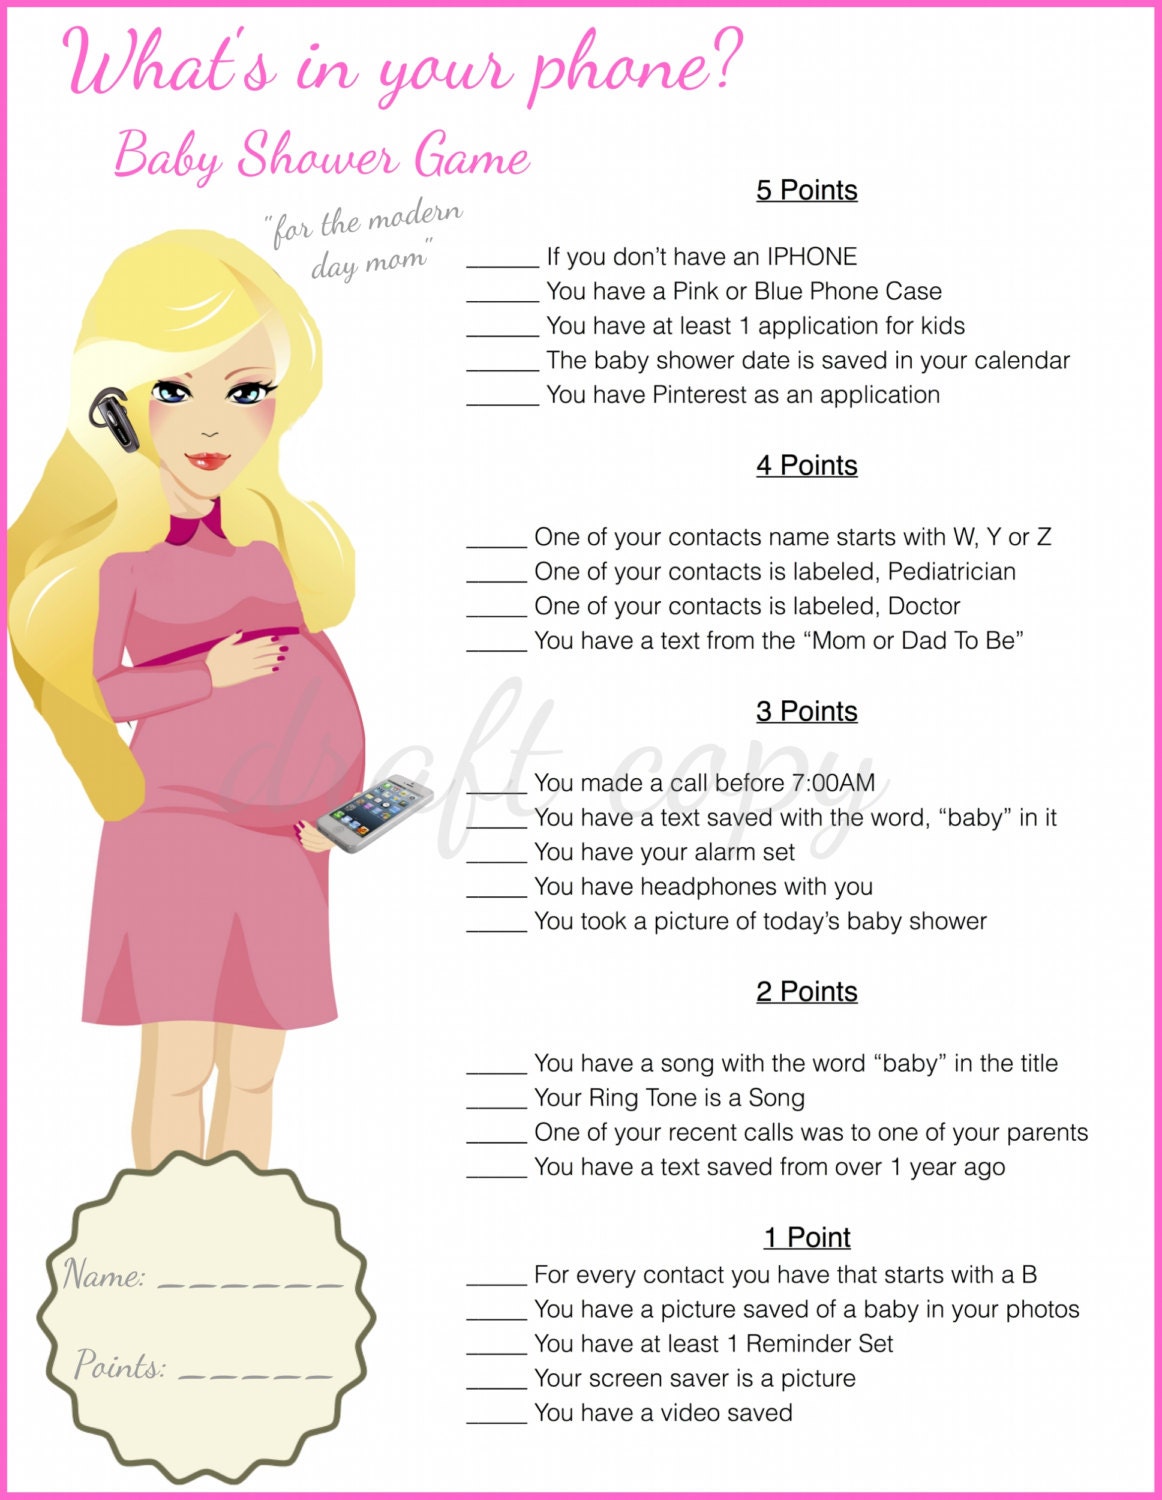 baby-shower-game-whats-in-your-phone-digital-image